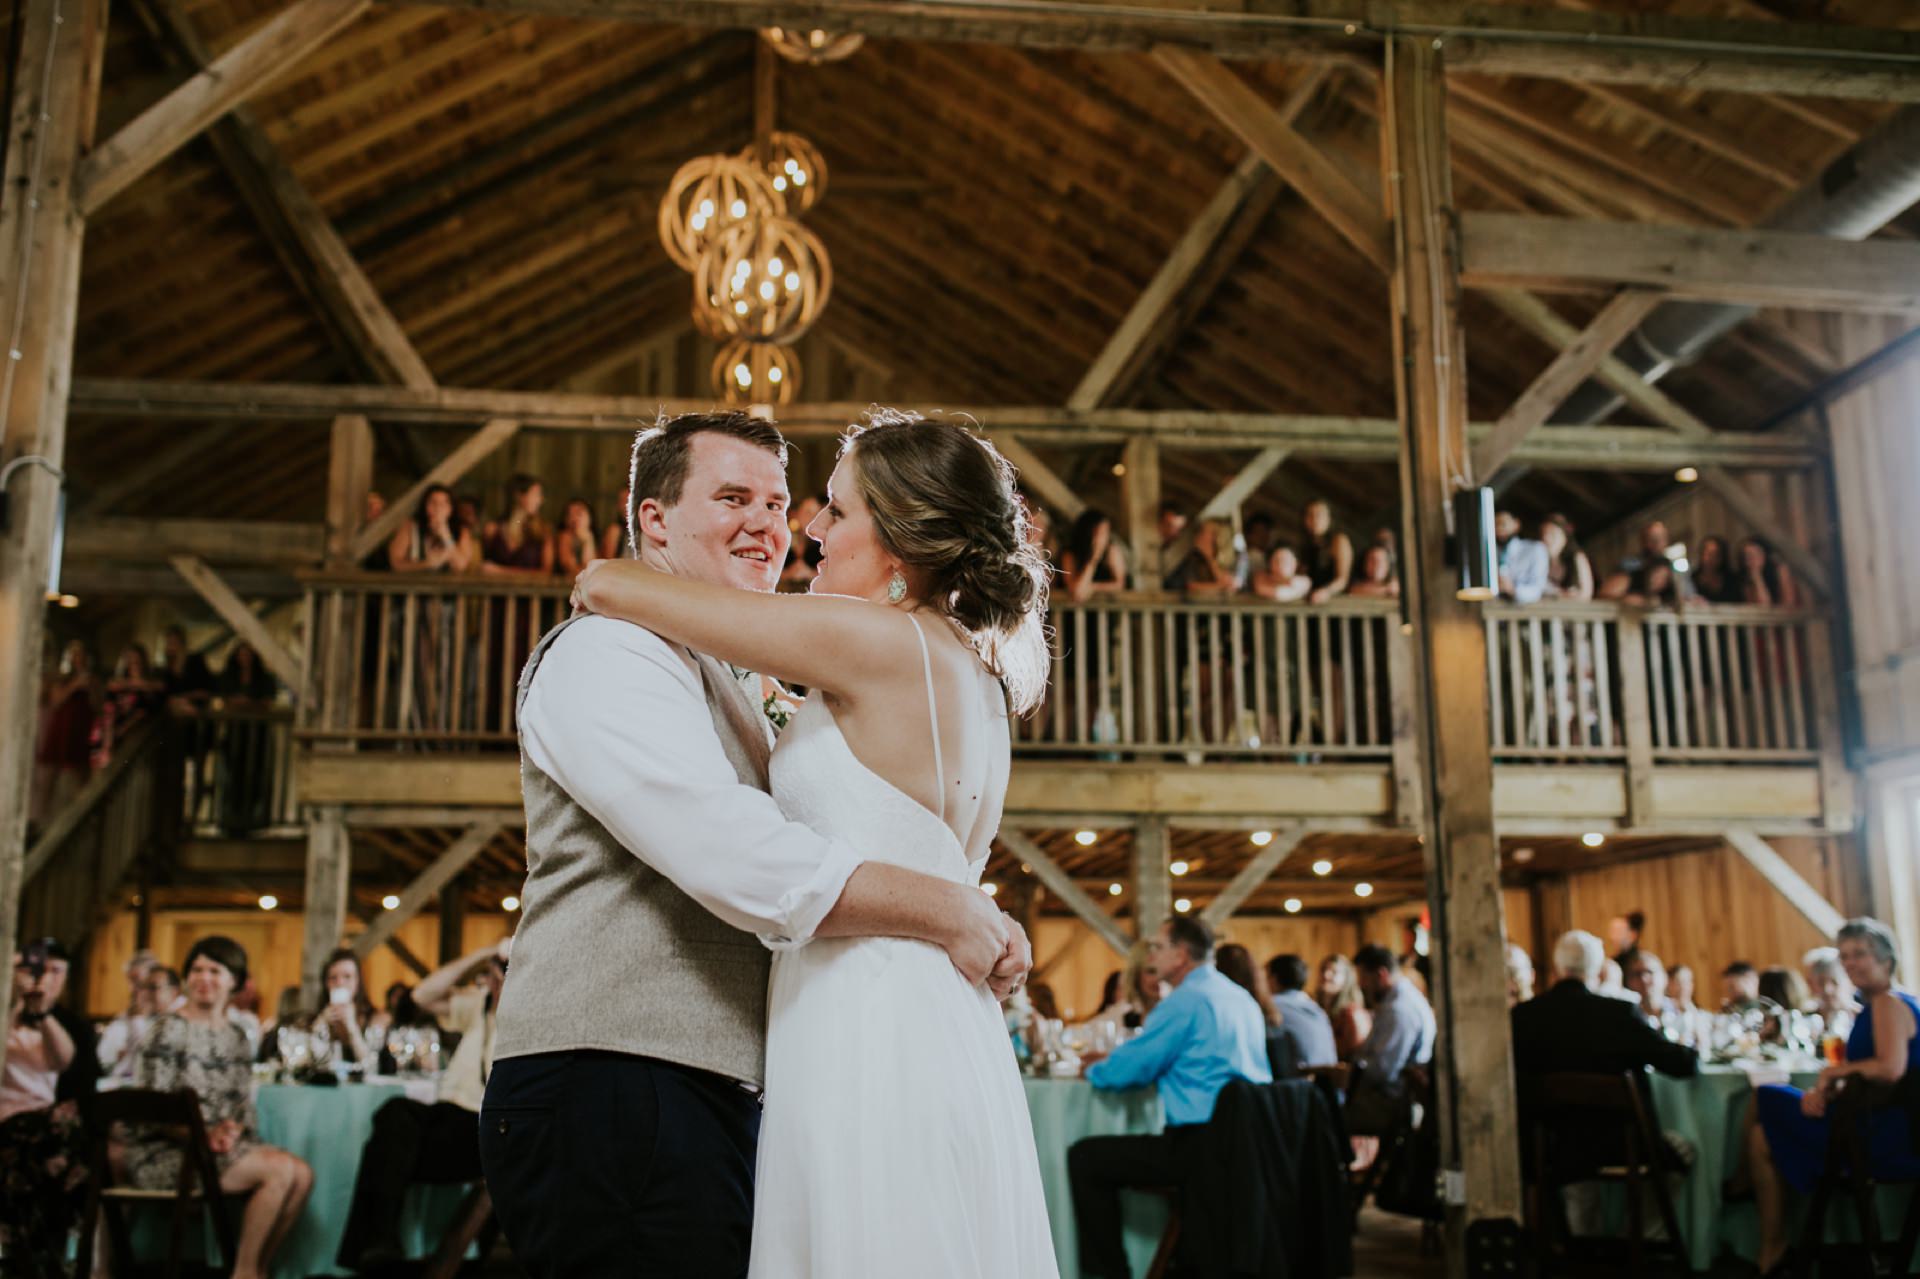 a bride and groom dance in a barn at their lindley farmstead wedding while people watch on the ground floor and in the balcony